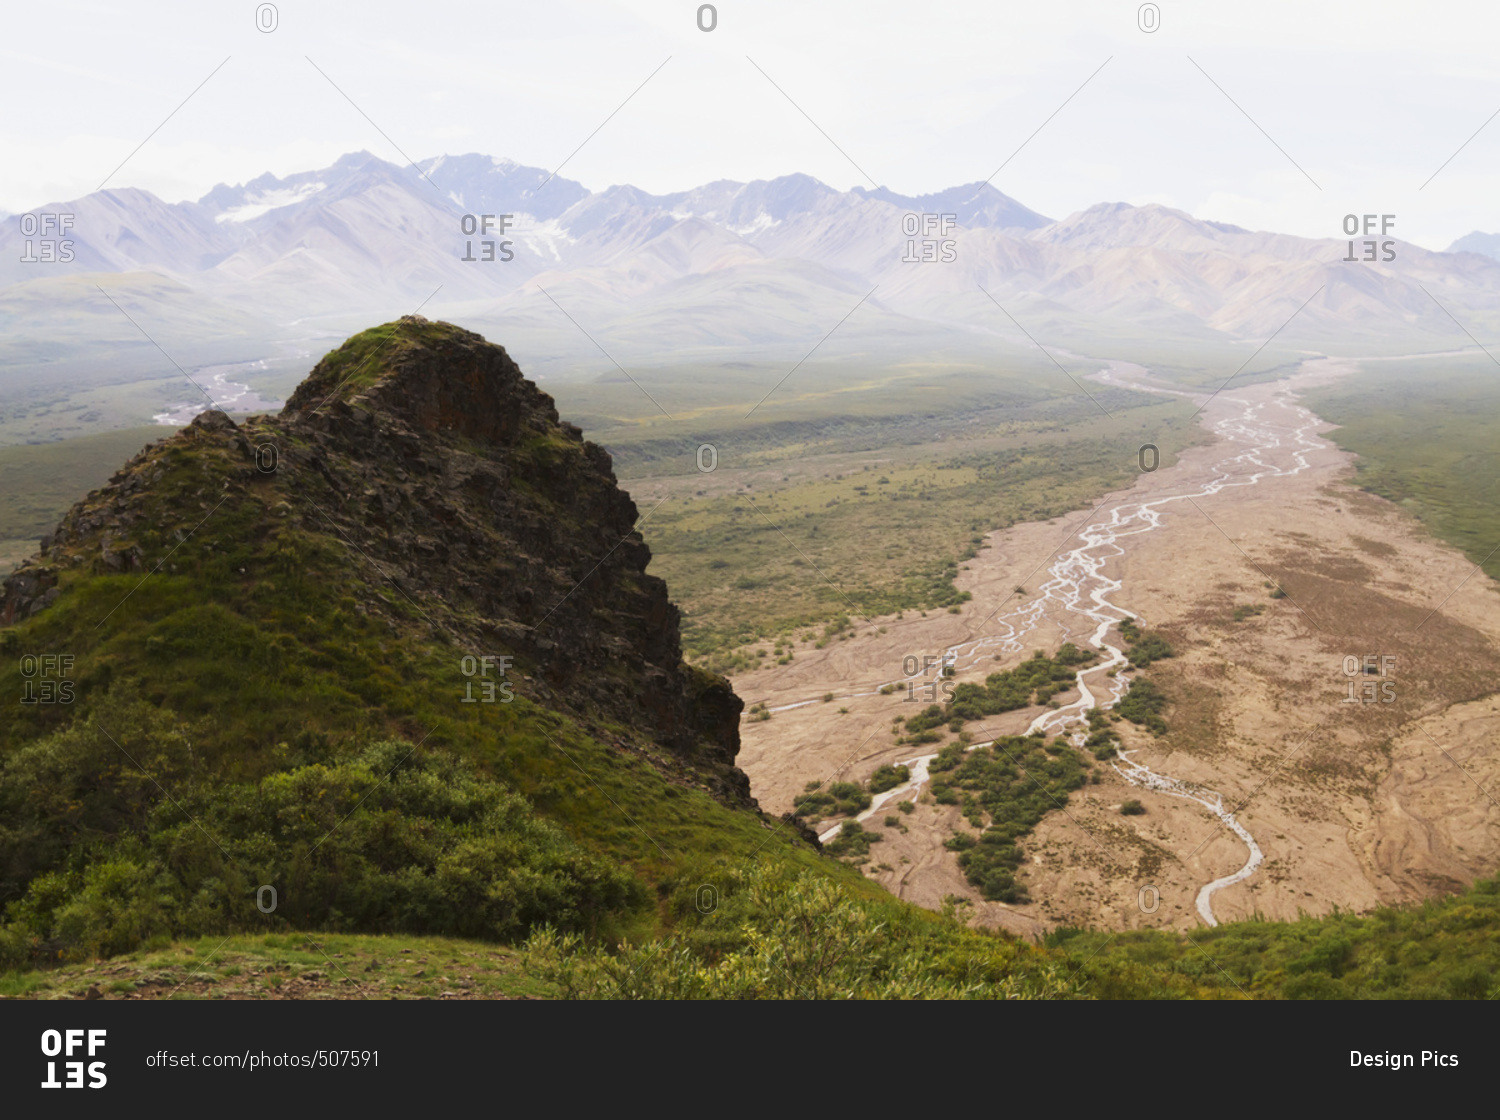 View from park road of Marmot Rock in Polychrome Pass, Denali National Park and Preserve, interior Alaska in summertime; Alaska, United States of America